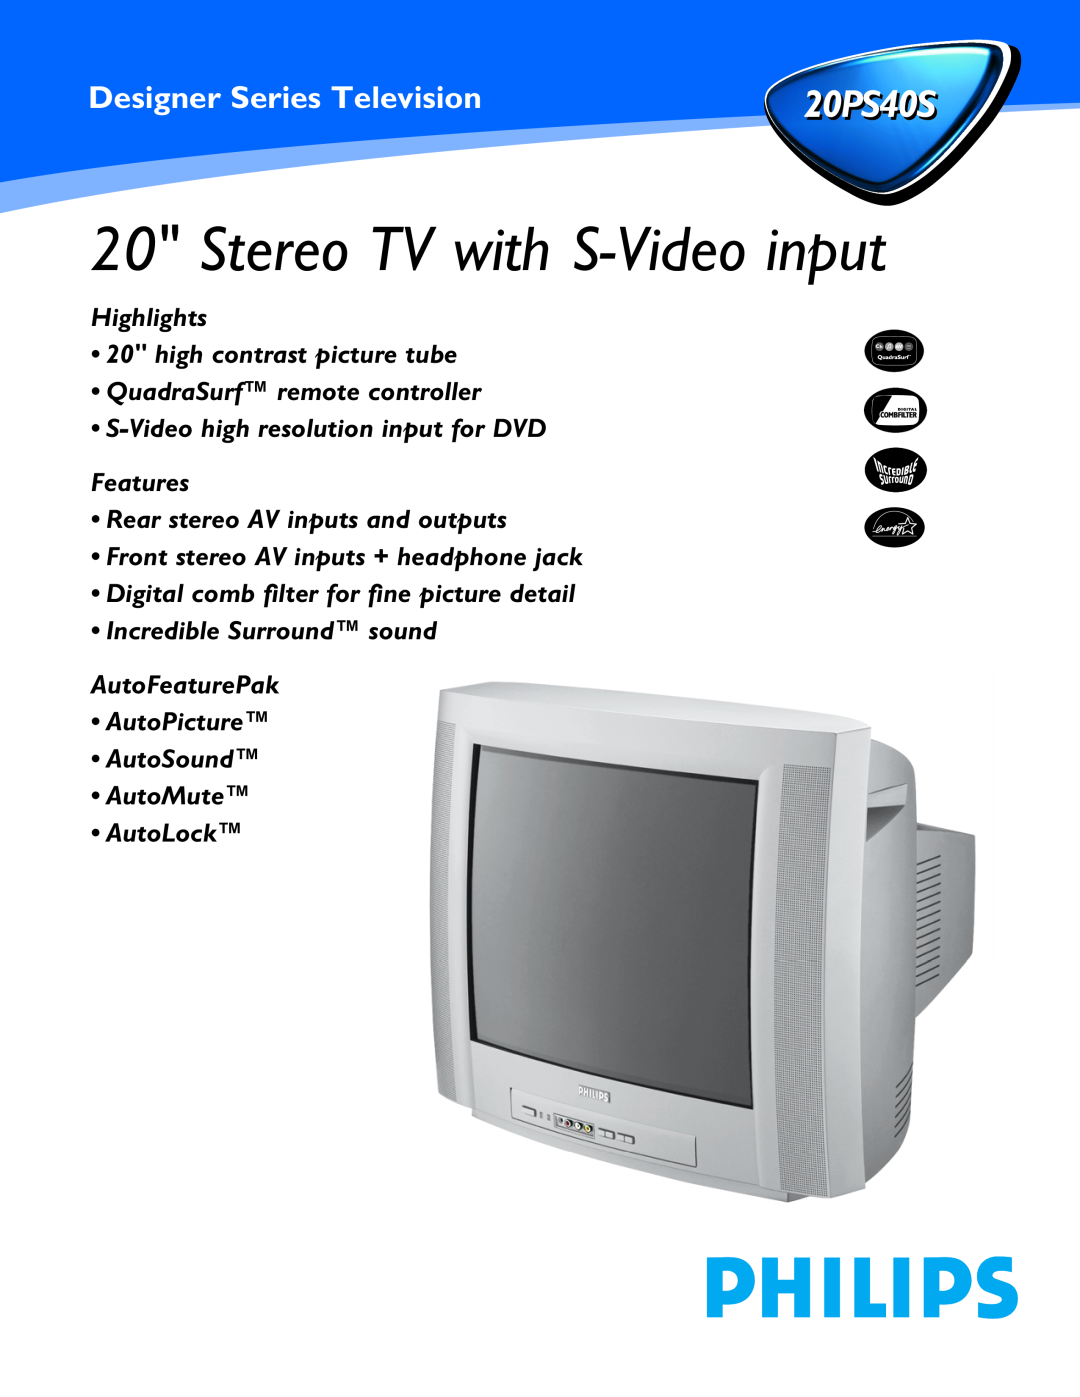 Philips 20PS40S manual Stereo TV with S-Video input, Designer Series Television, Rear stereo AV inputs and outputs 